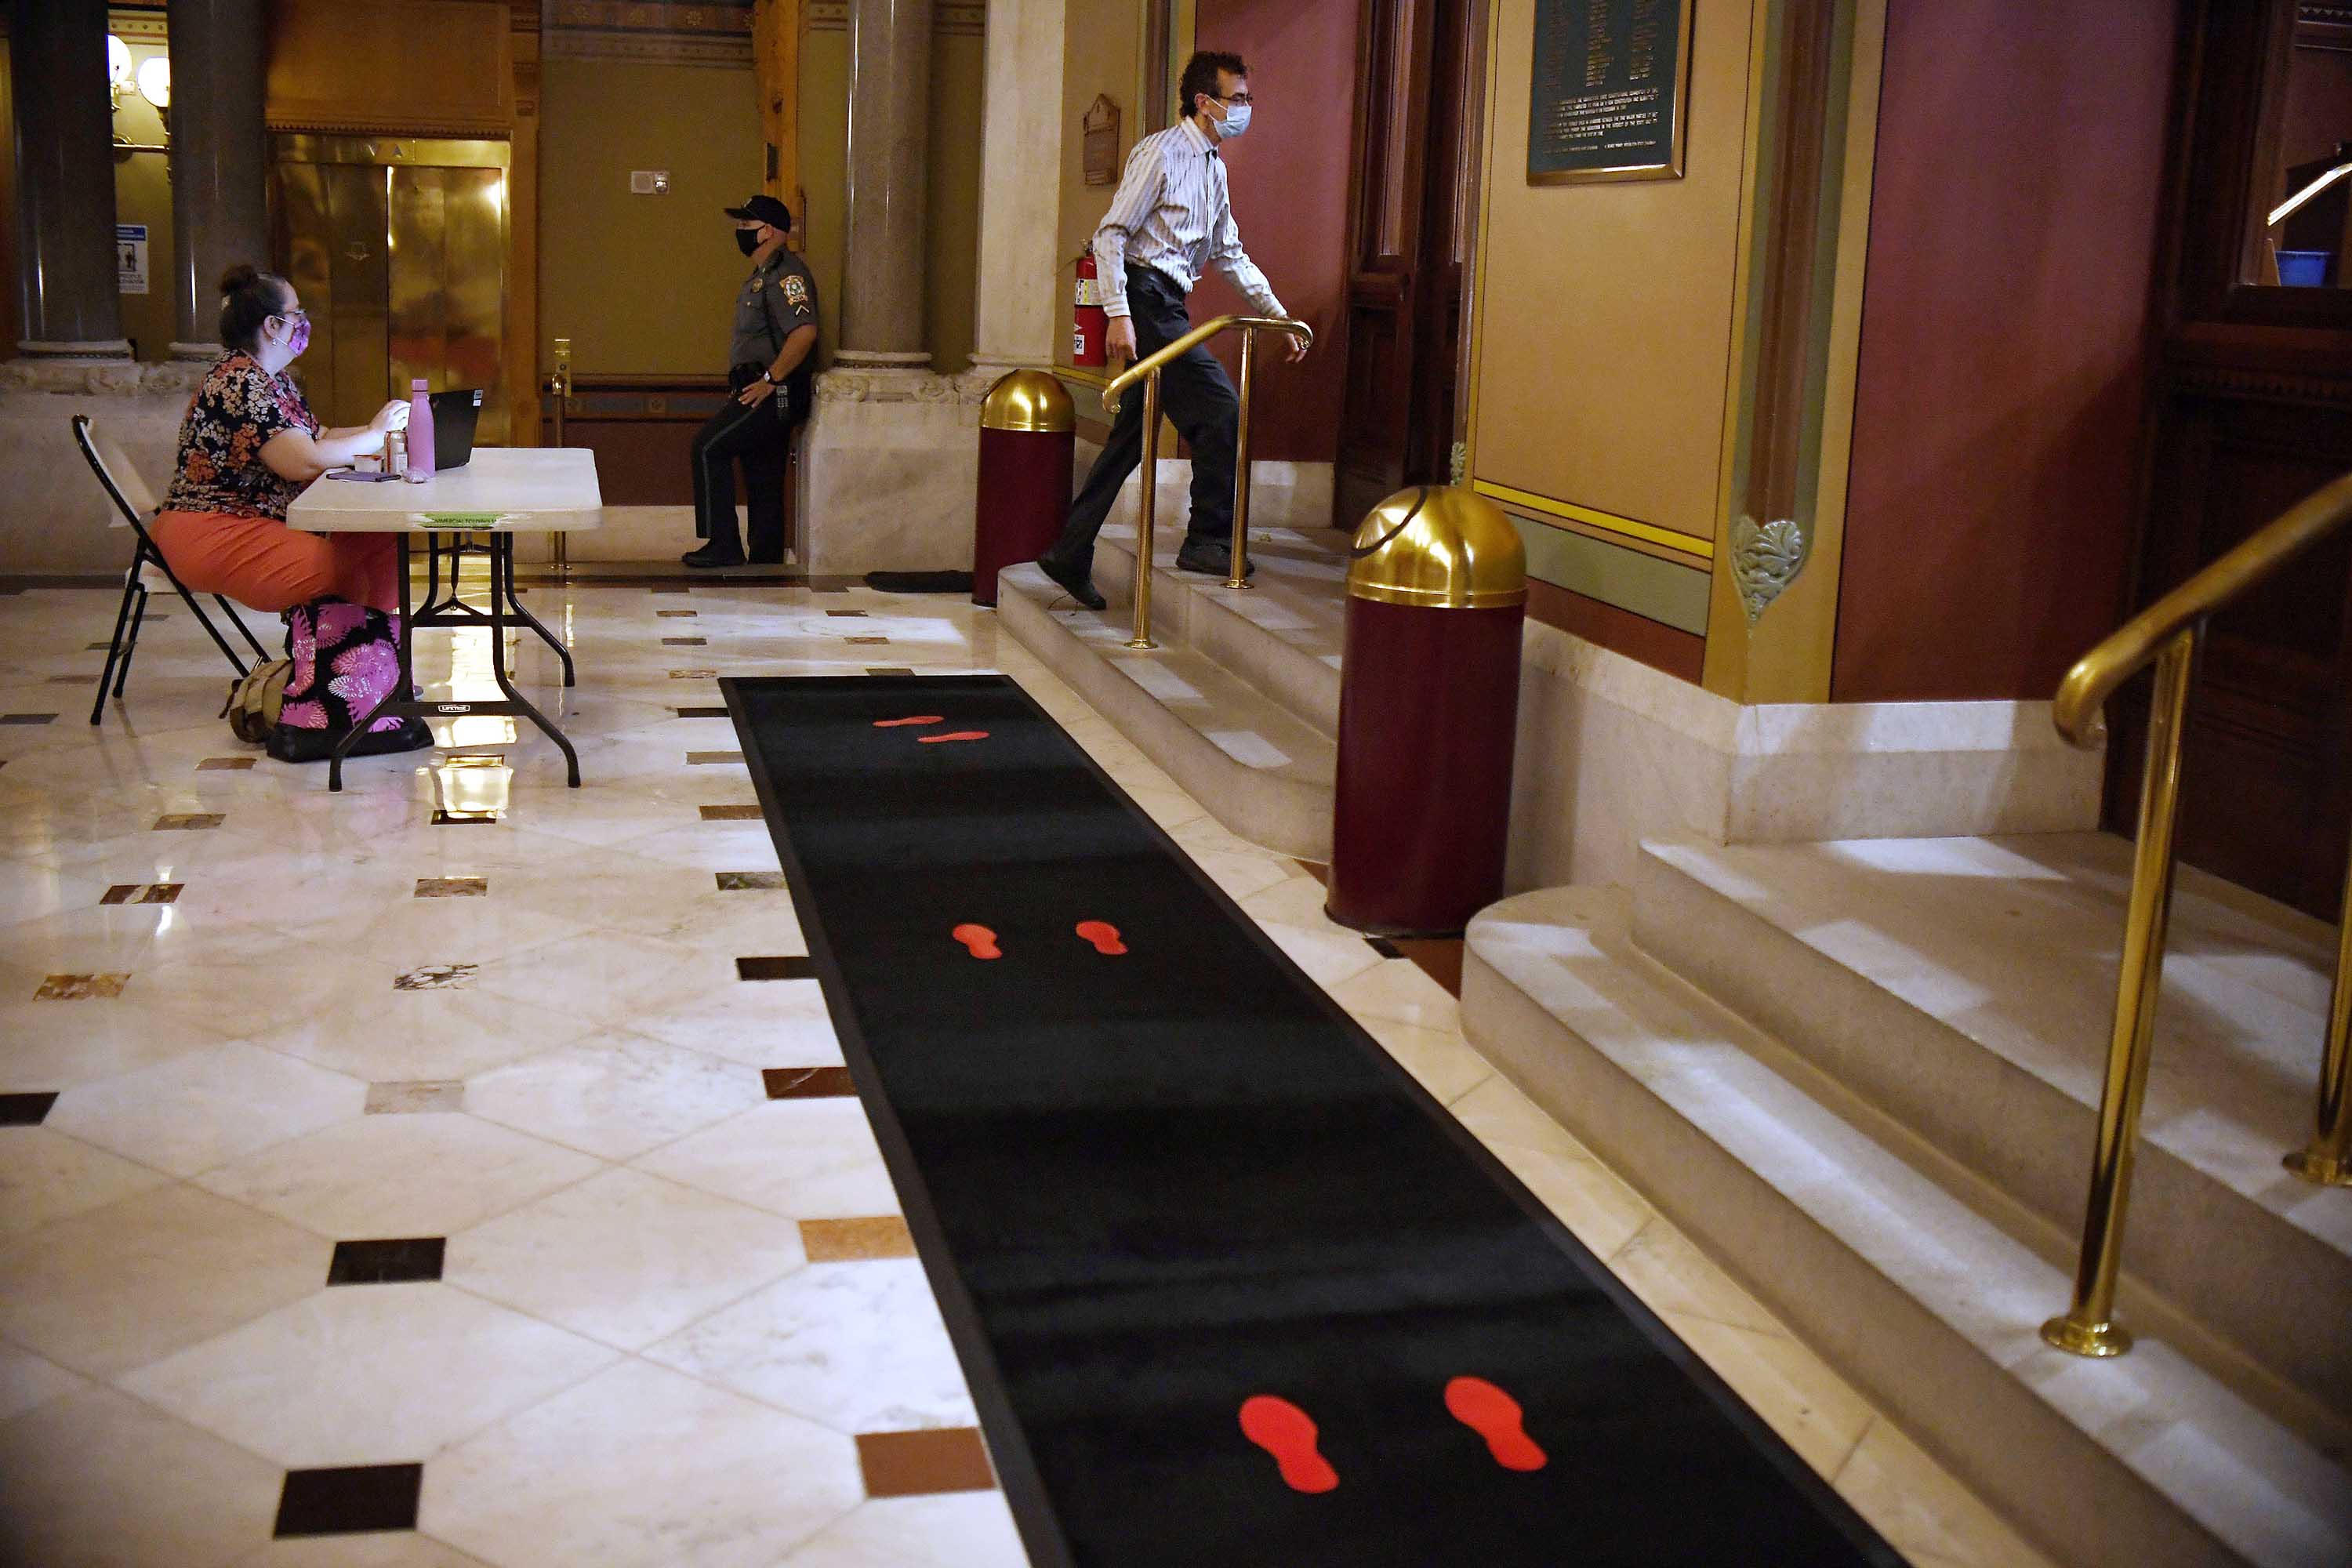 A floor mat indicates social distancing guidelines as legislative staff members enter the House at the Connecticut State Capitol in Hartford, on July 23.